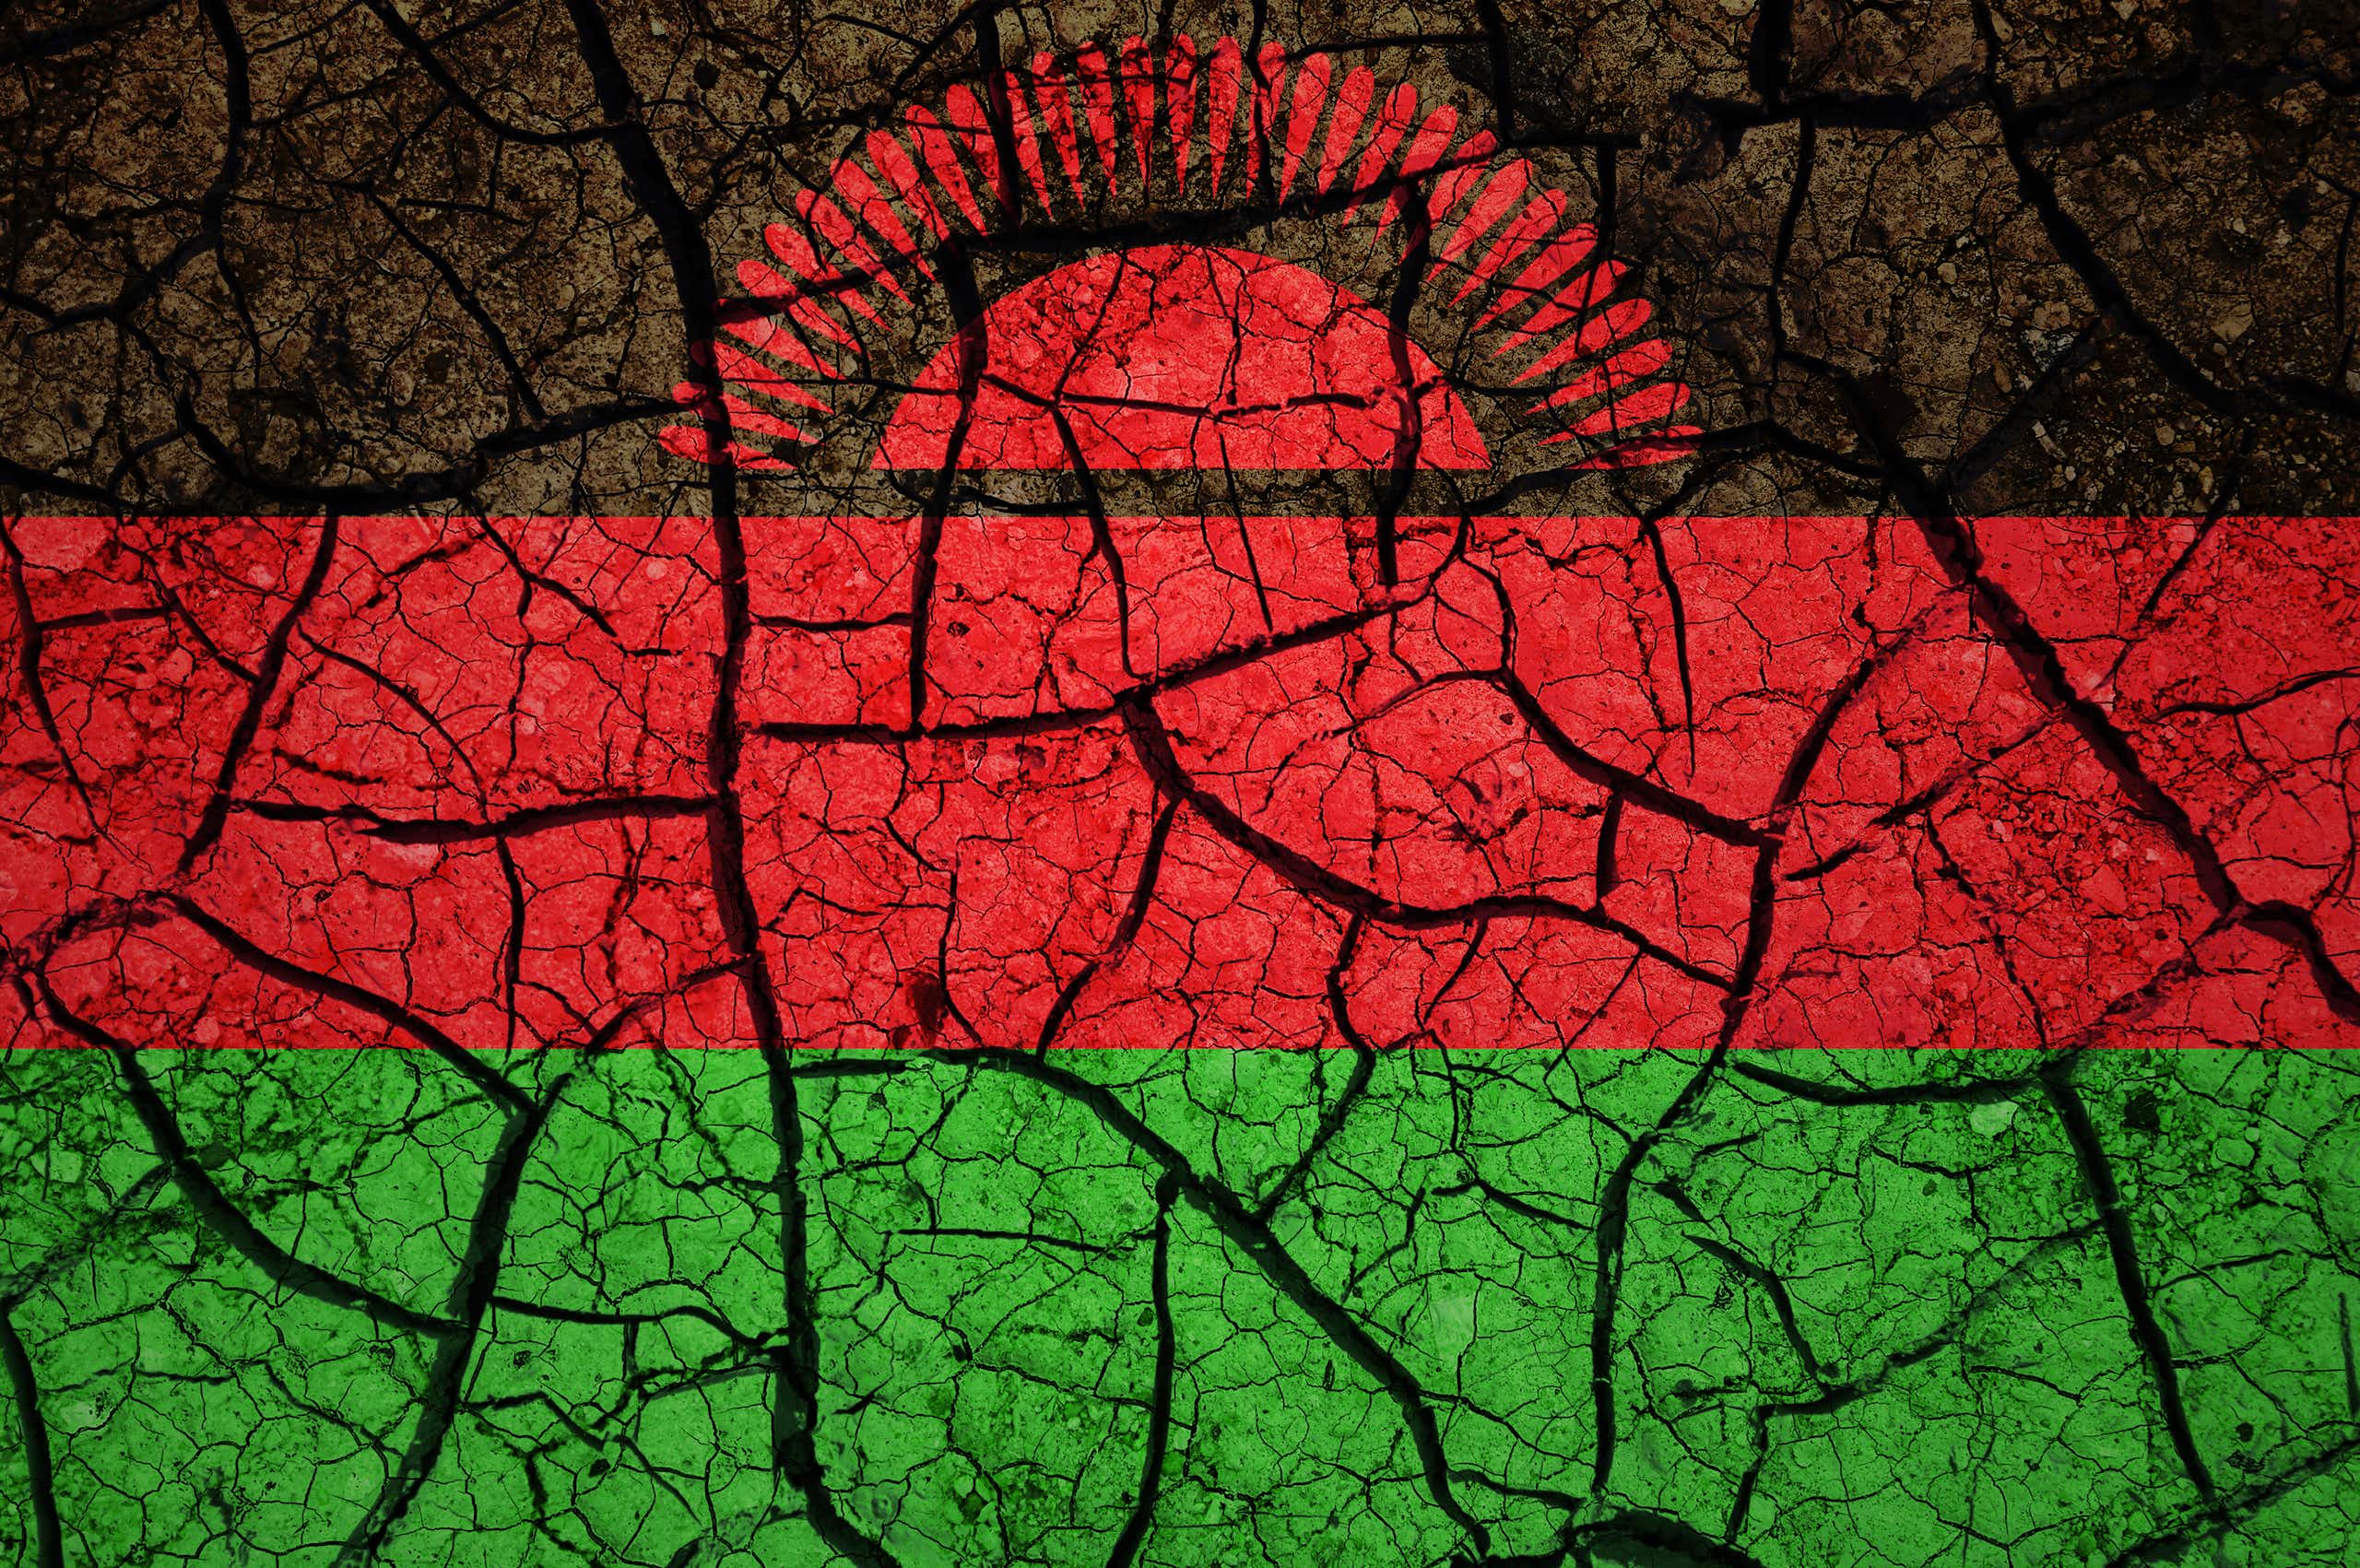 Black, red and green striped flag with rising sun emblem, with effect like cracked dried mud